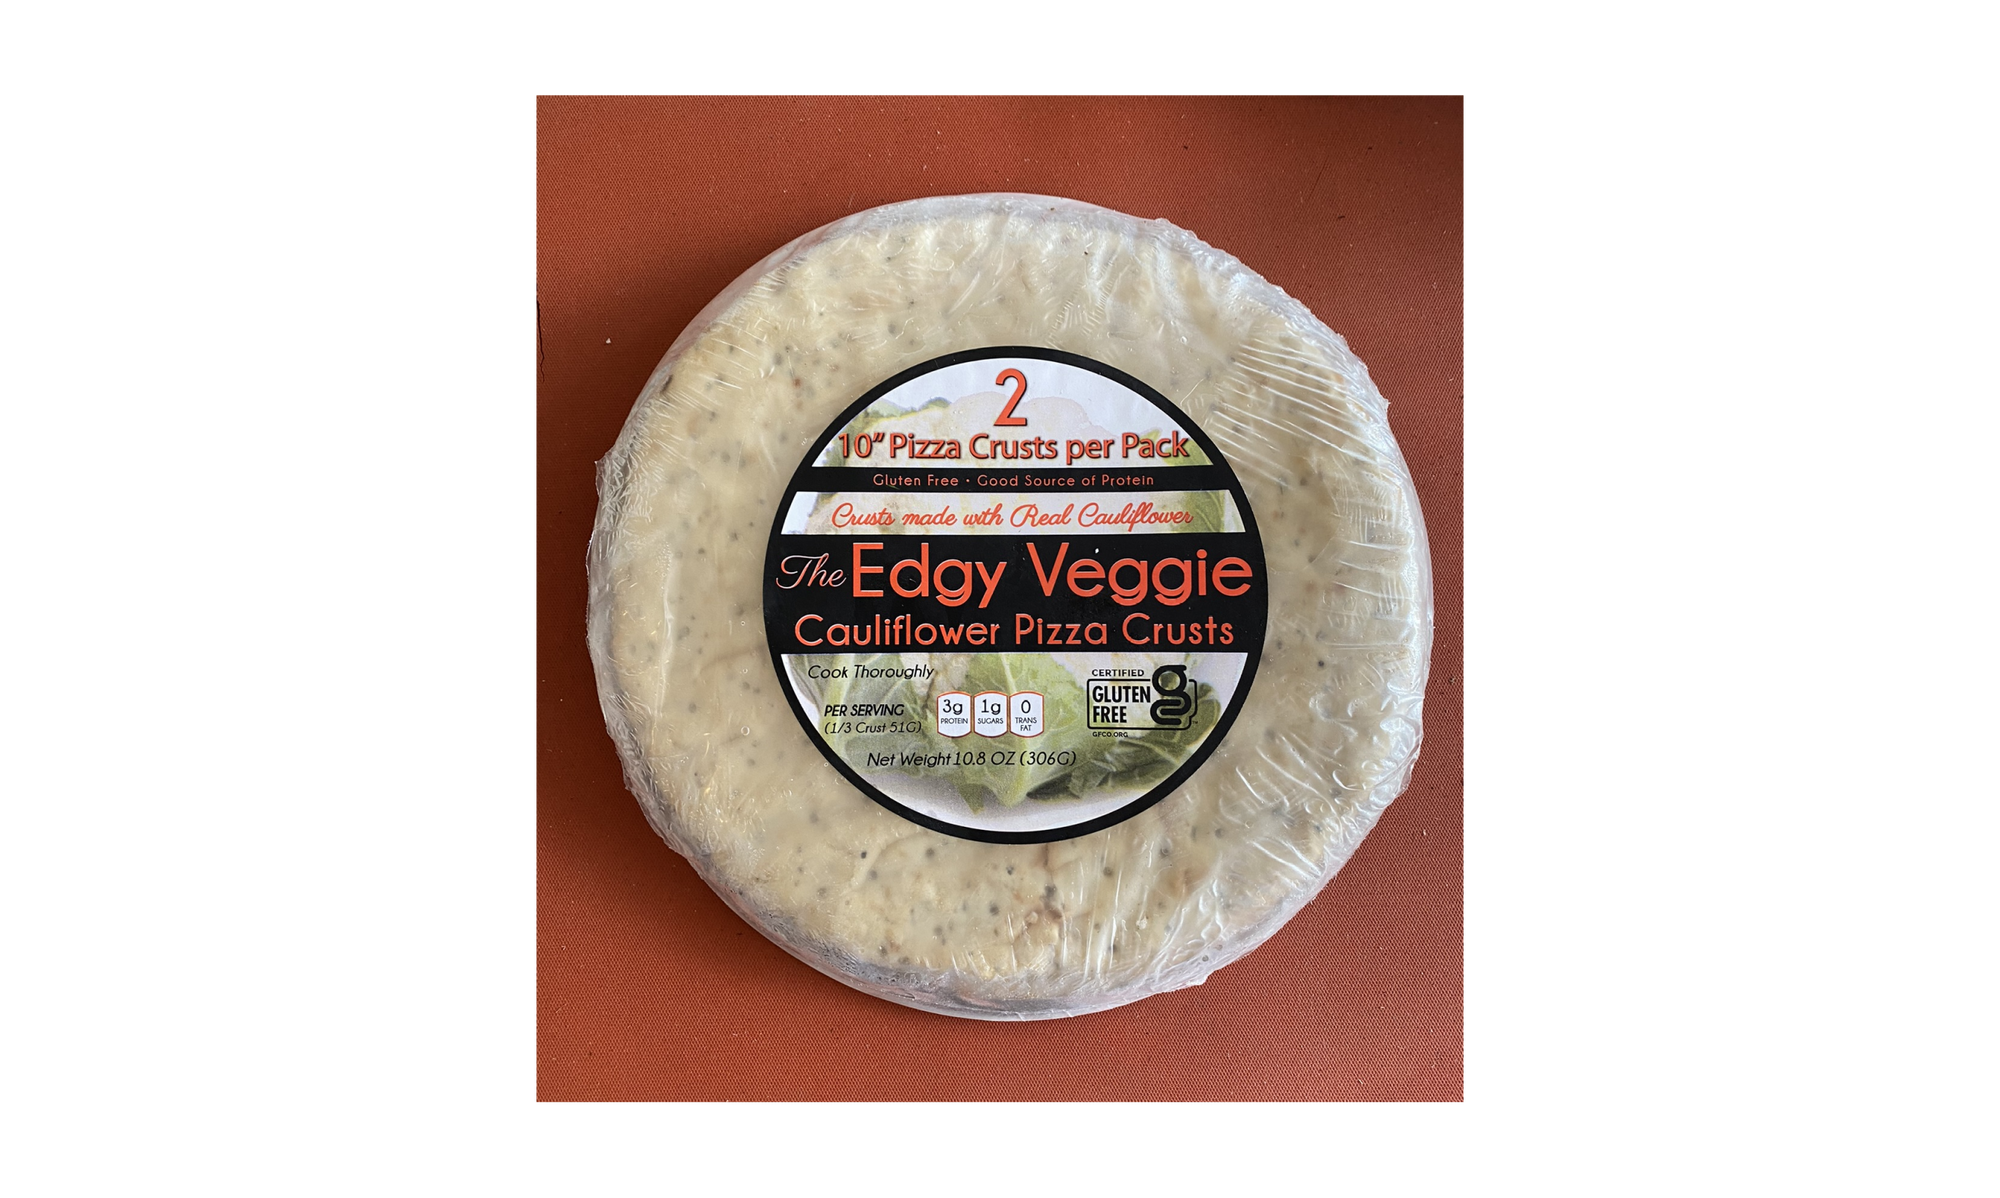 Gluten Free Plant Based Pizza Products - The Edgy Veggie